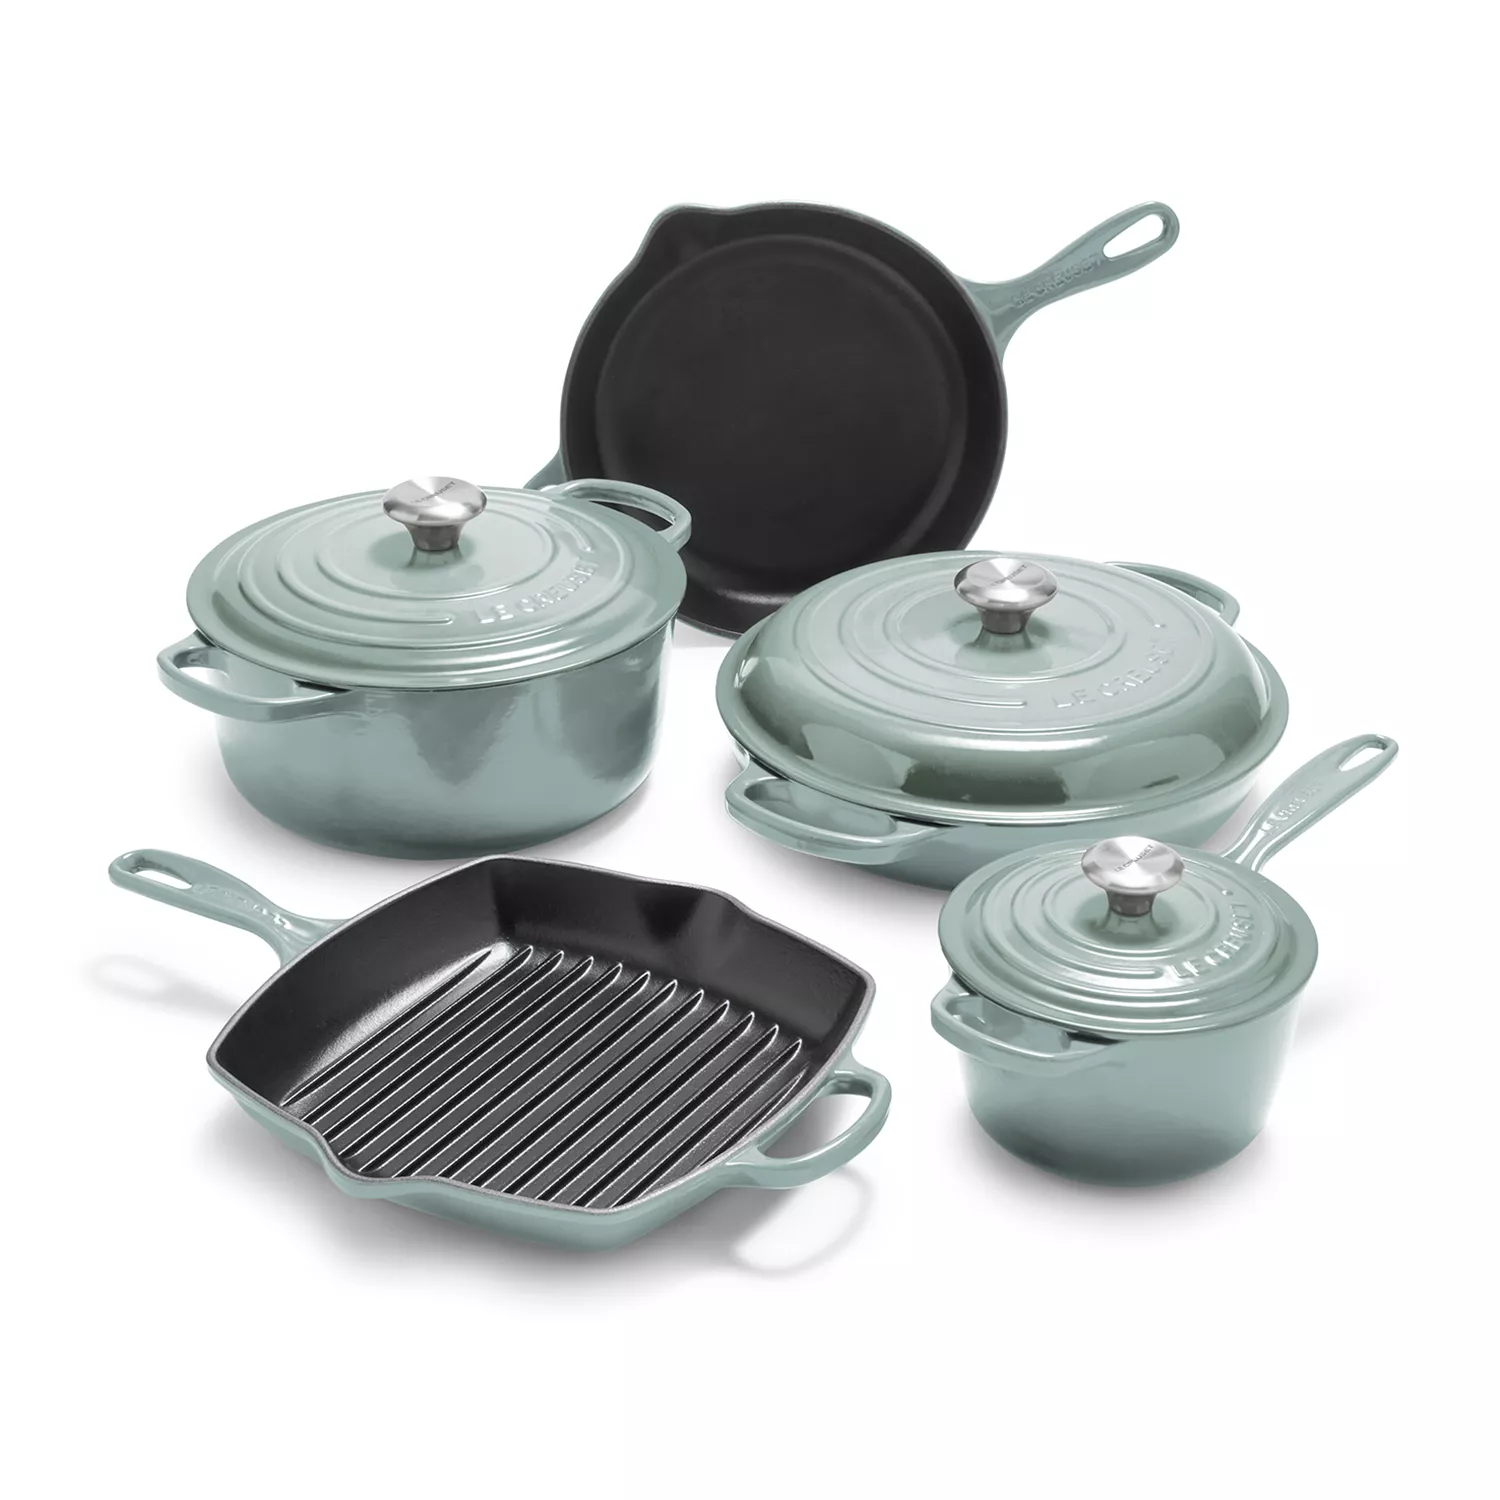  Le Creuset 20 Piece Kitchen Essentials Cookware Set with Enameled  Cast-Iron, Enameled Stoneware and Toughened Non-Stick - White: Home &  Kitchen